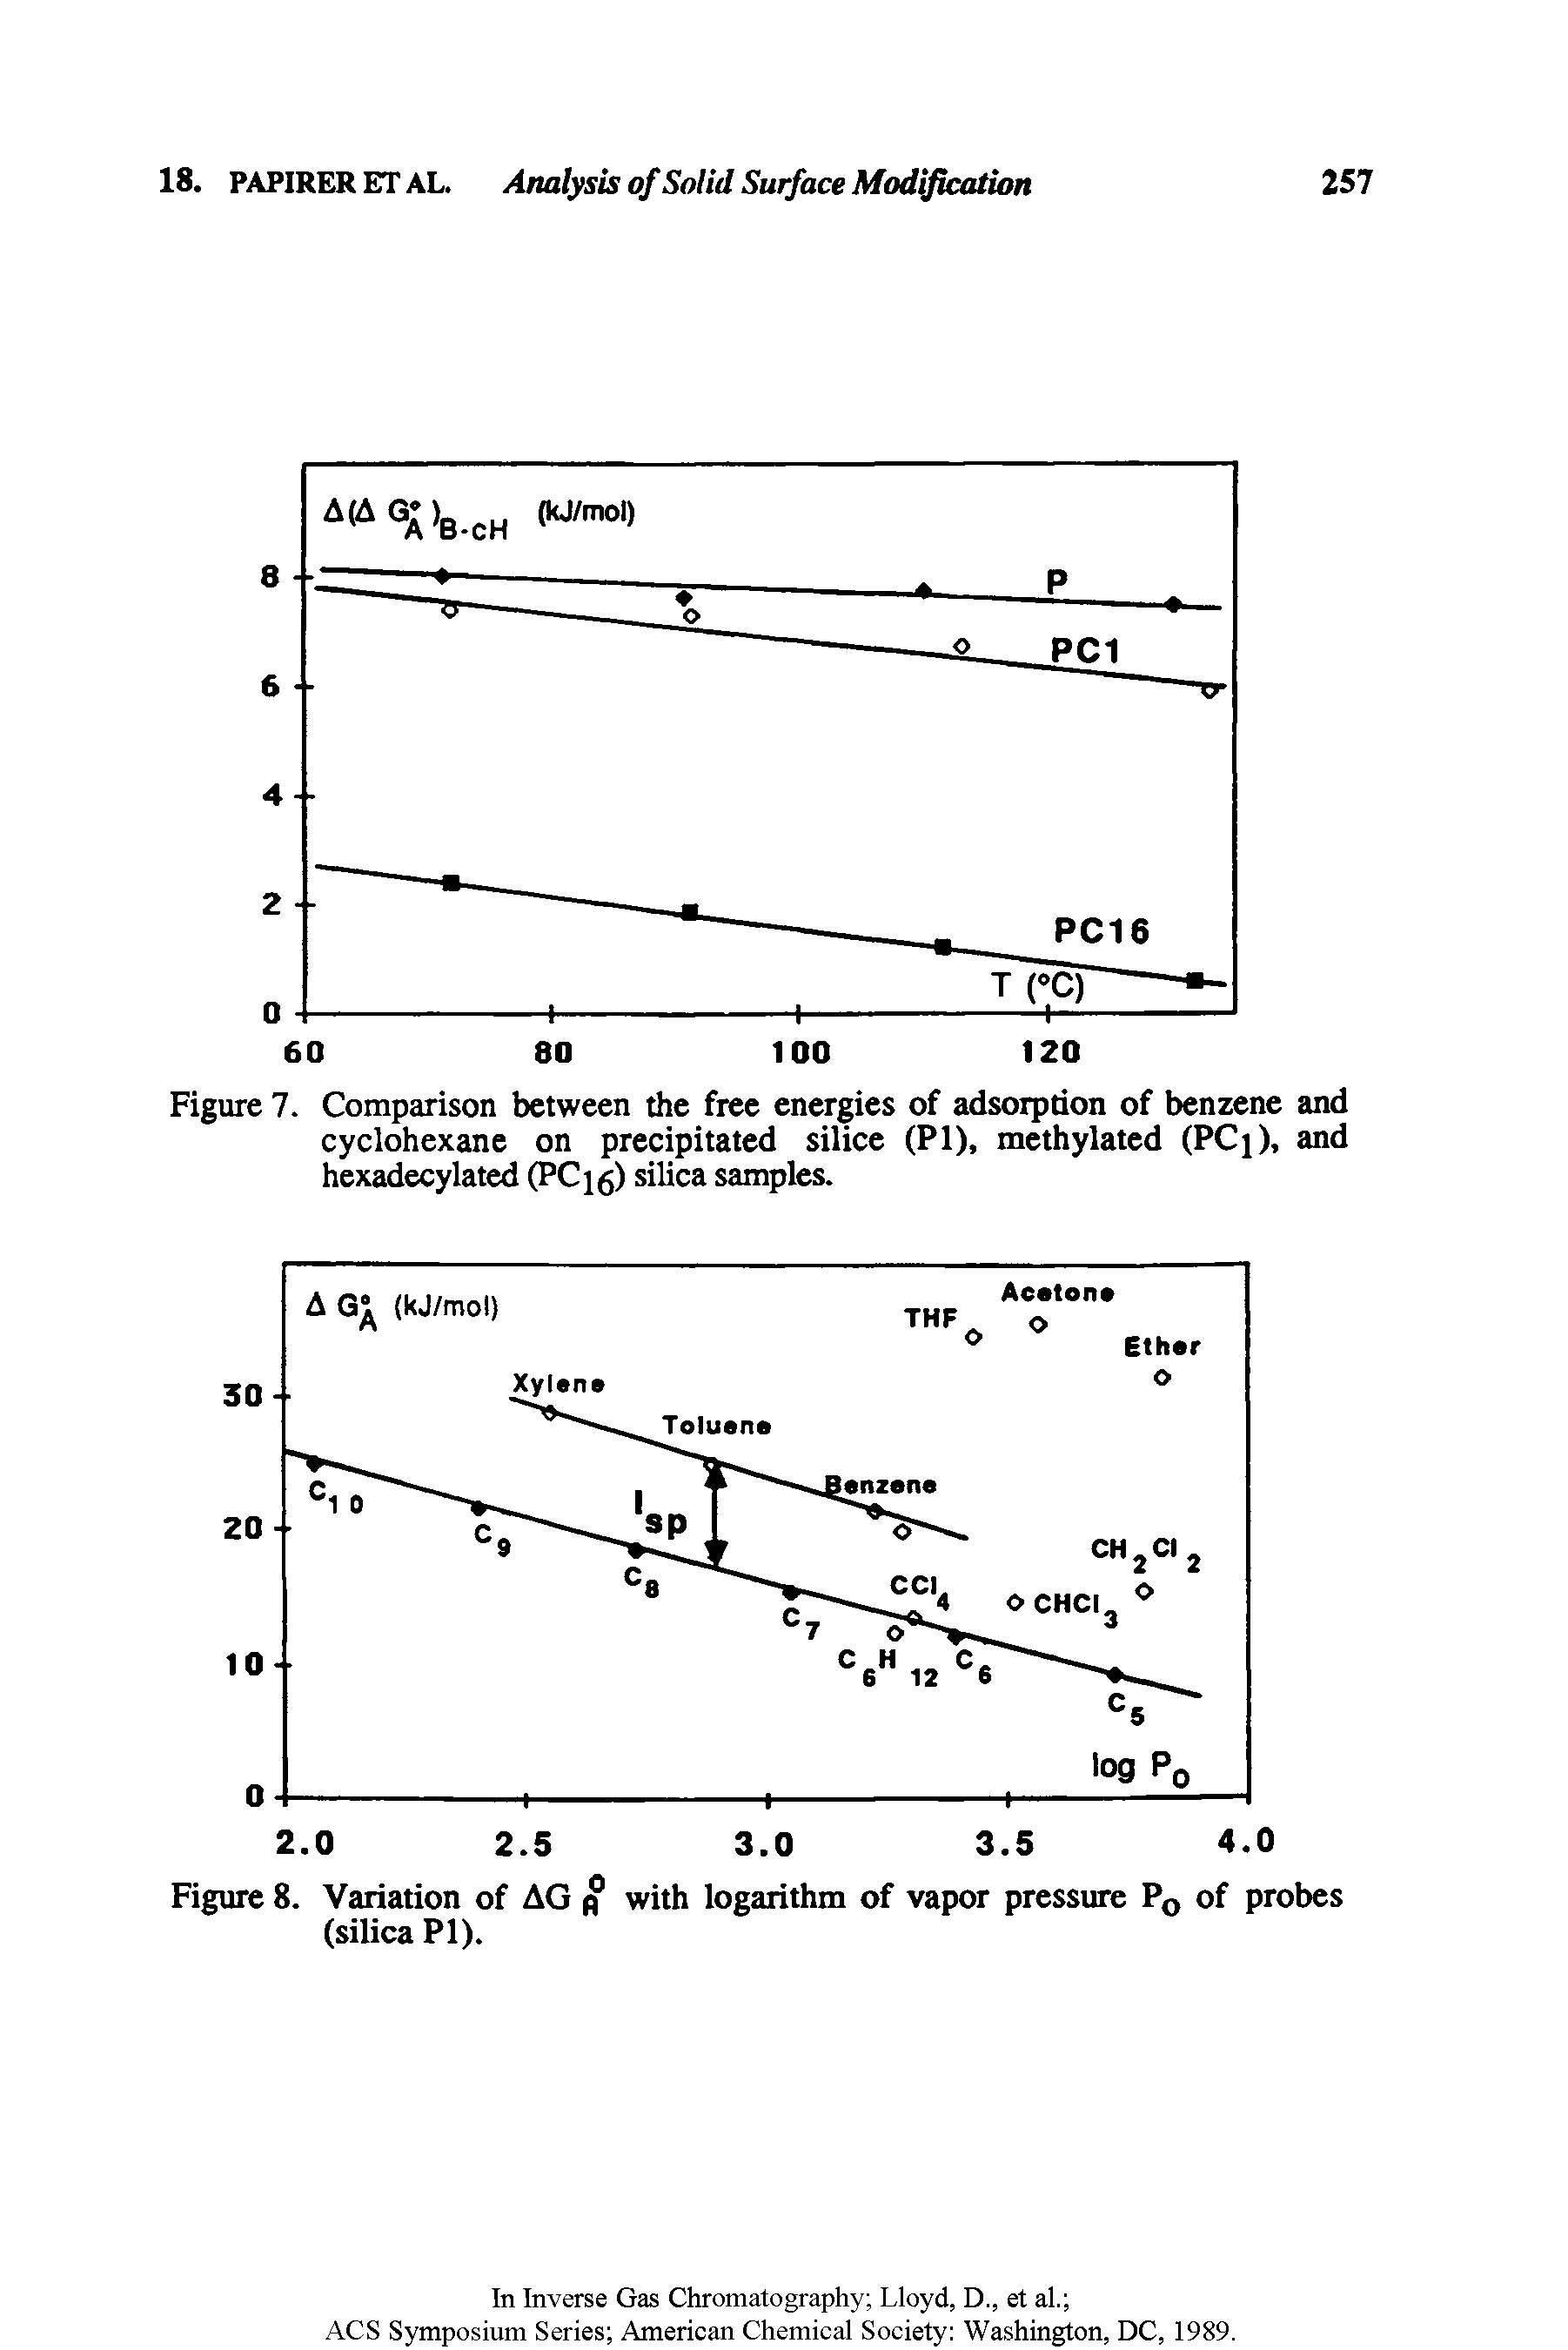 Figure 7. Comparison between the free energies of adsorption of benzene and cyclohexane on precipitated silice (PI), methylated (PCj), and hexadecylated (PCjg) silica samples.